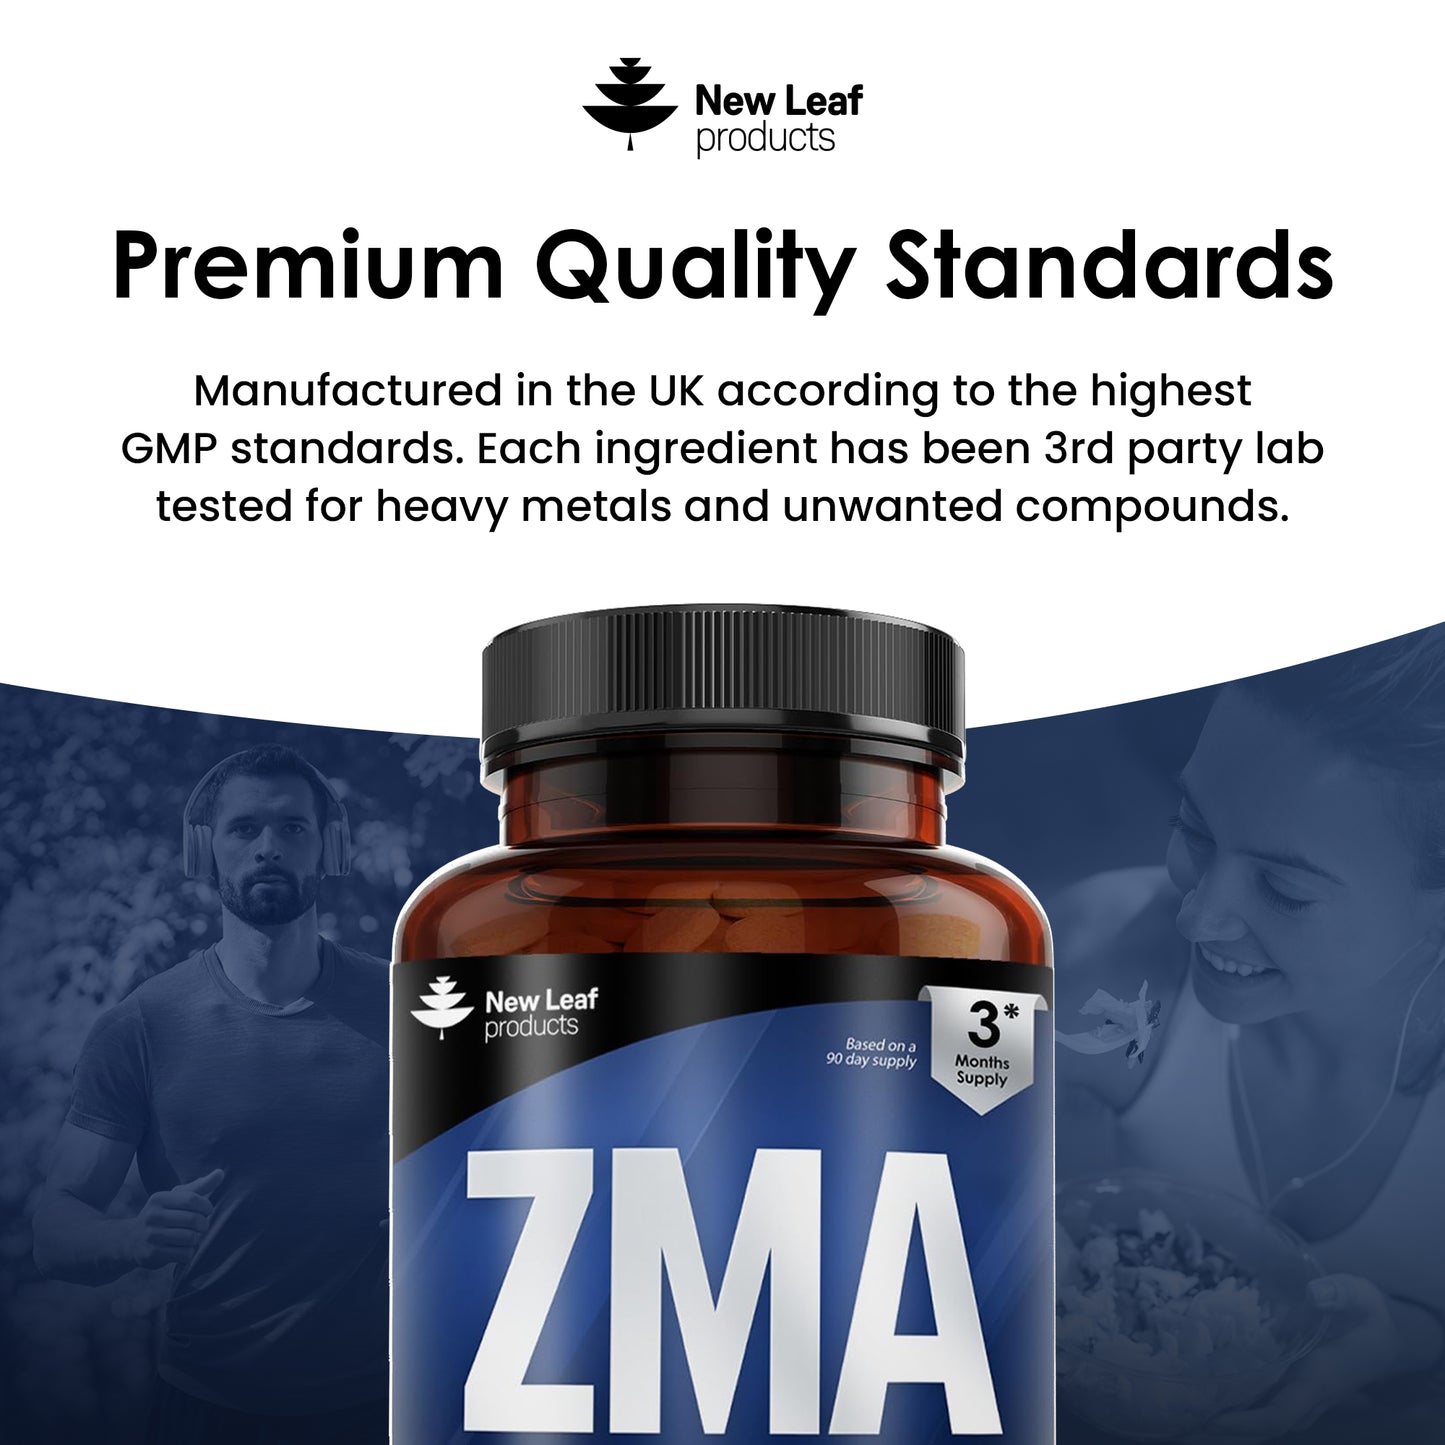 ZMA Supplement - 180 Tablets Zinc Magnesium & Vitamin B6 - High Strength Muscle Sleep Aid & Muscle Recovery